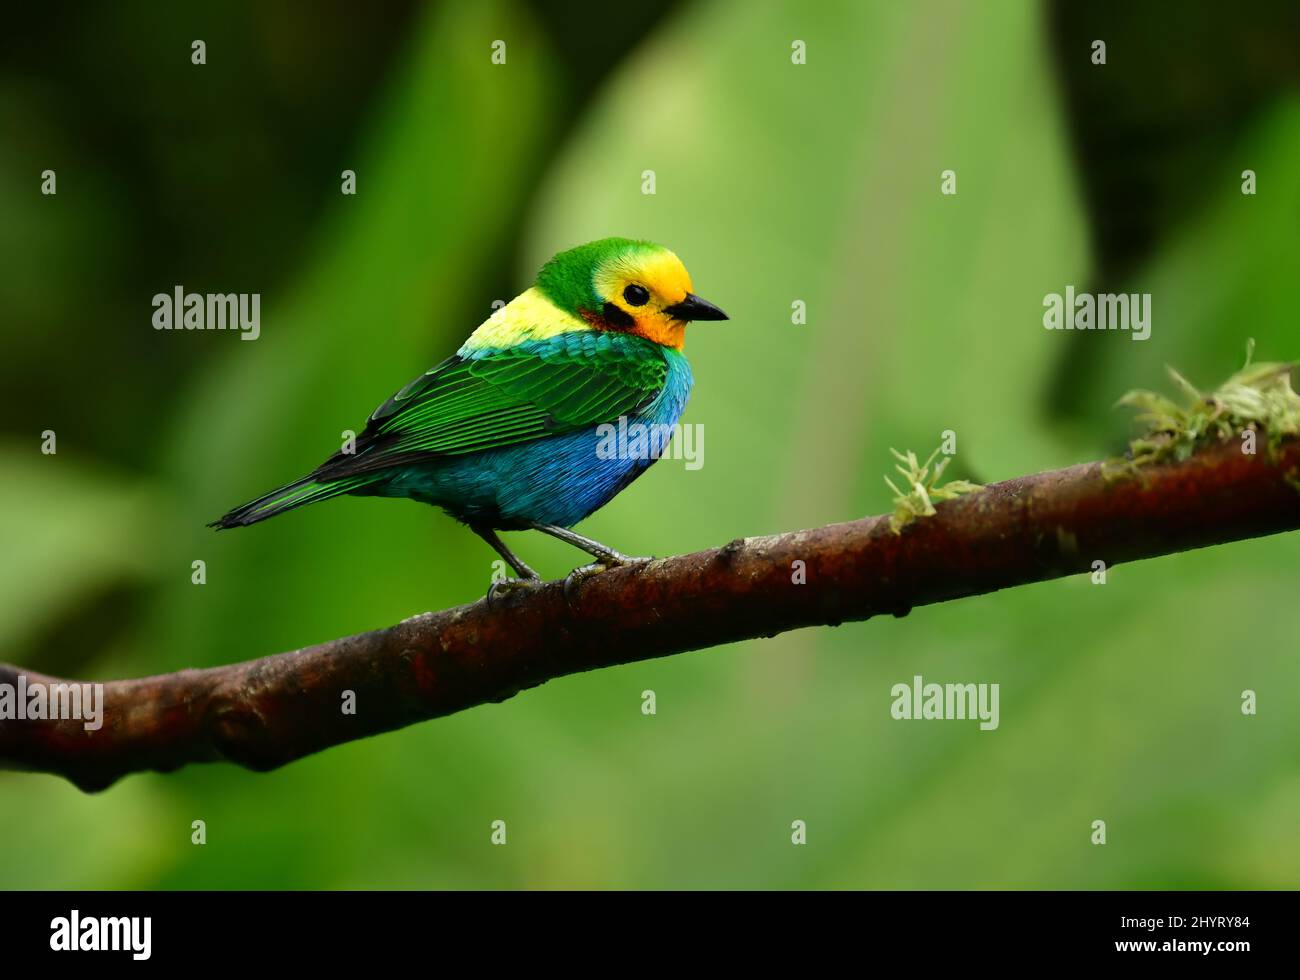 Multicoloured Tanager (Chlorochrysa nitidissima), endemic bird of Colombia perched on a branch. Valle der Cauca, Colombia Stock Photo